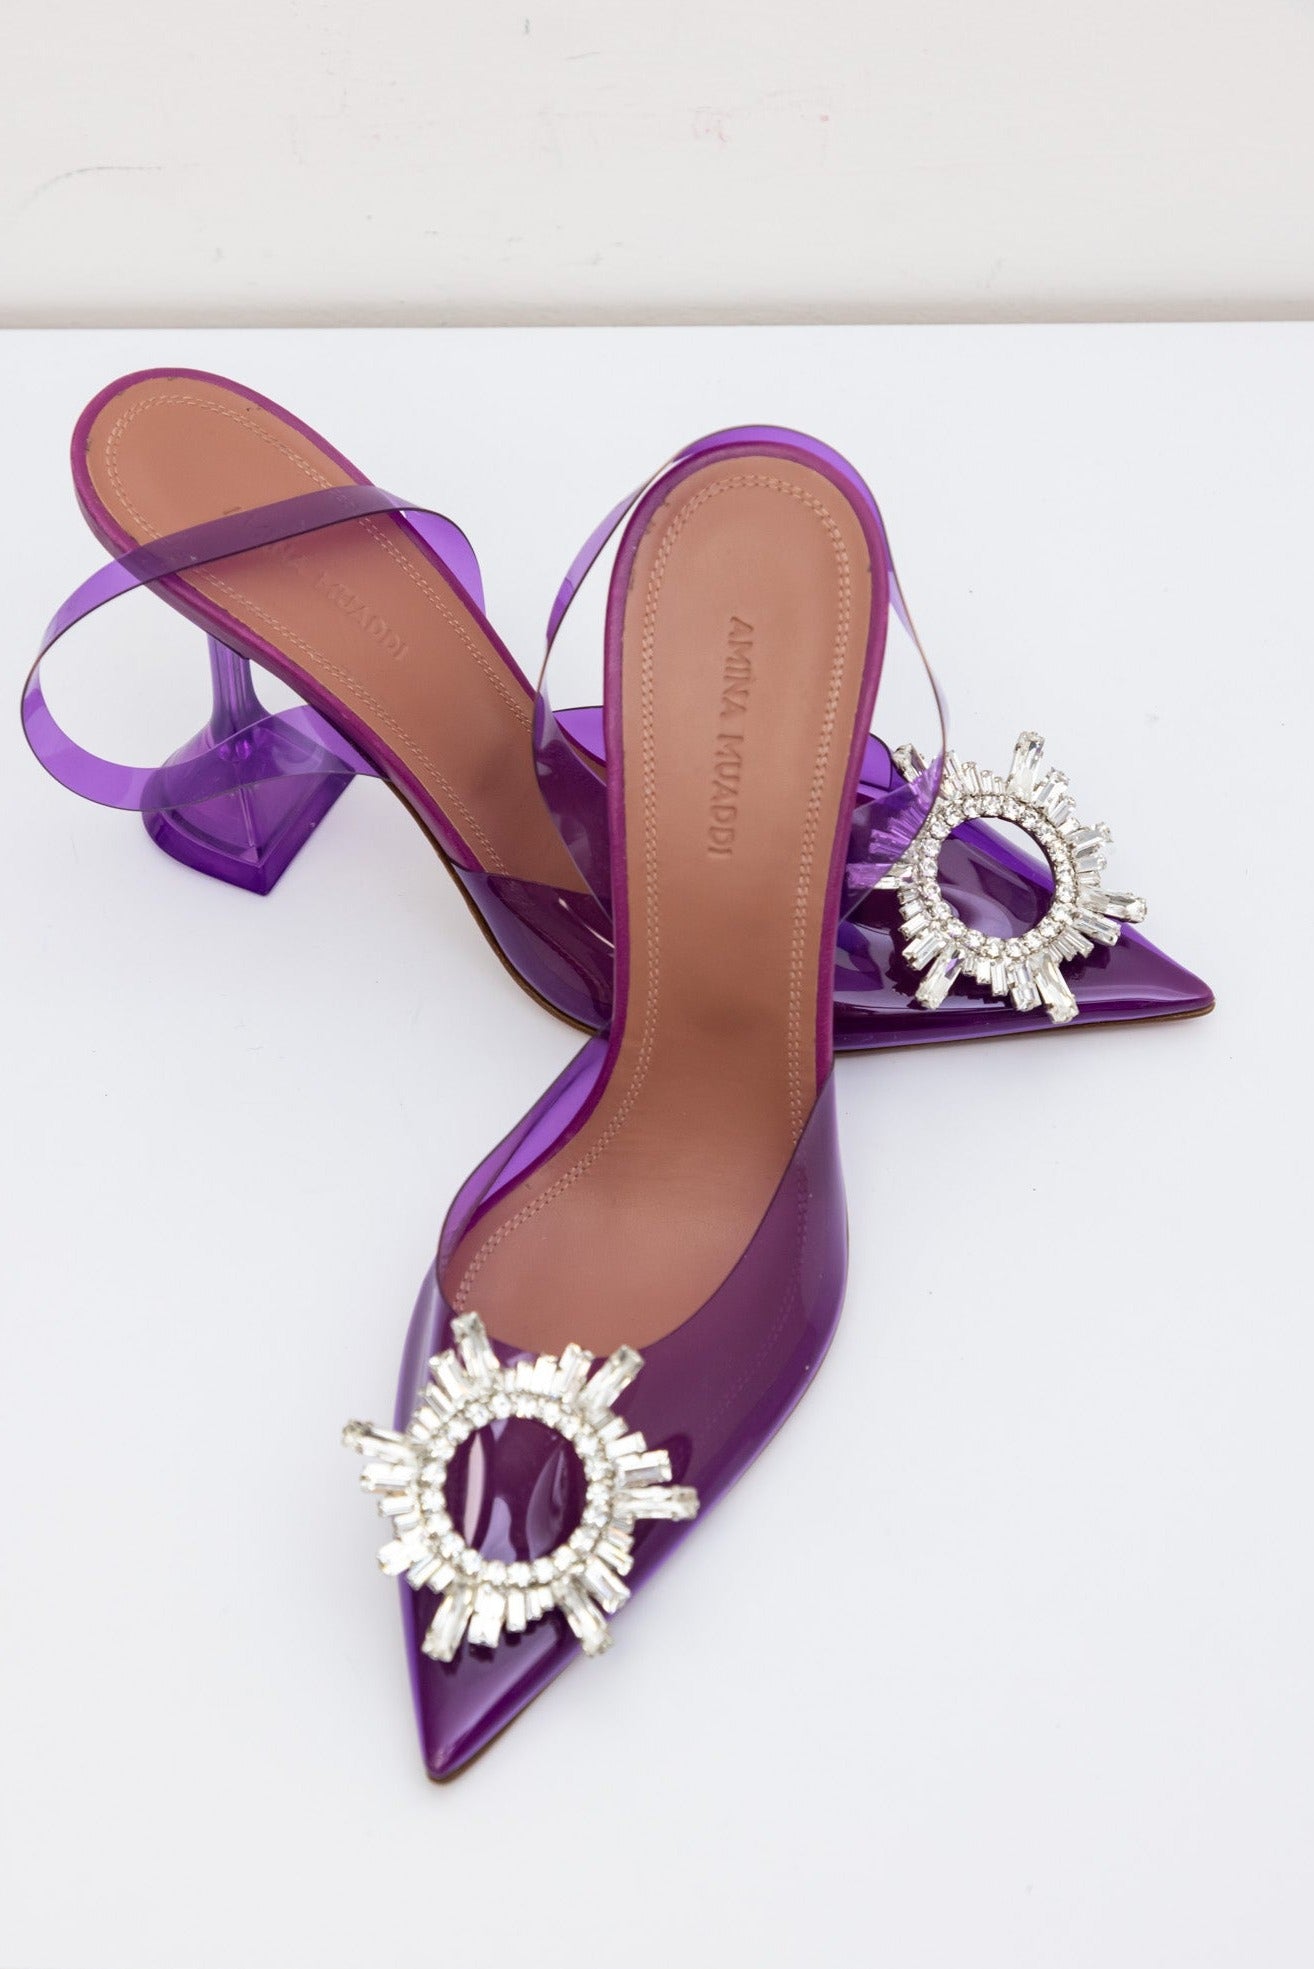 AMINA MUADDI Purple Begum Glass Crystal-Embellished Slingback Pumps | Size IT 38 | Made in Italy | New